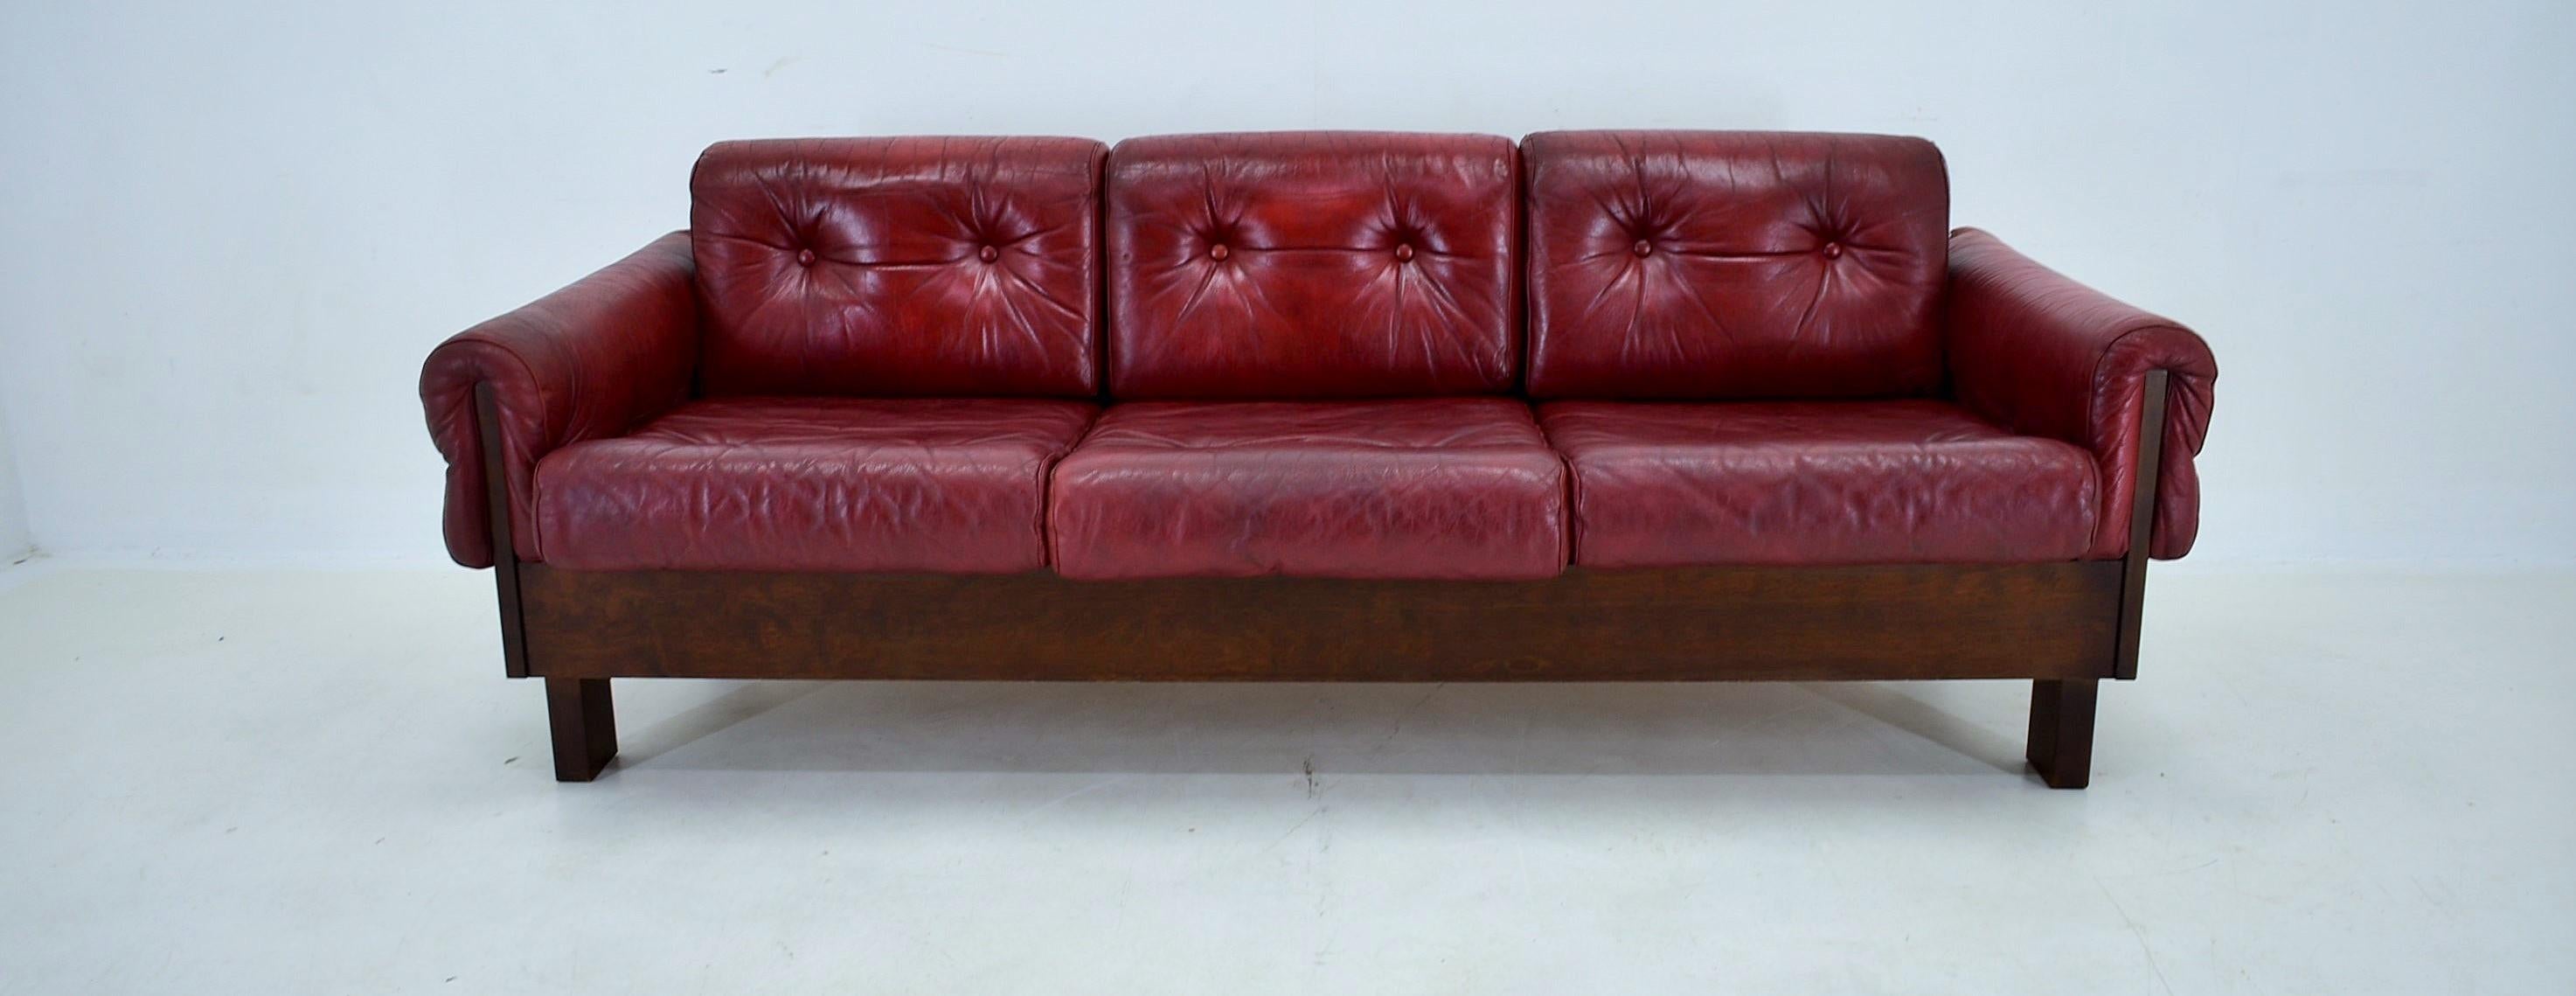 Mid-Century Modern 1970s Red Leather 3-Seater Sofa, Finland For Sale